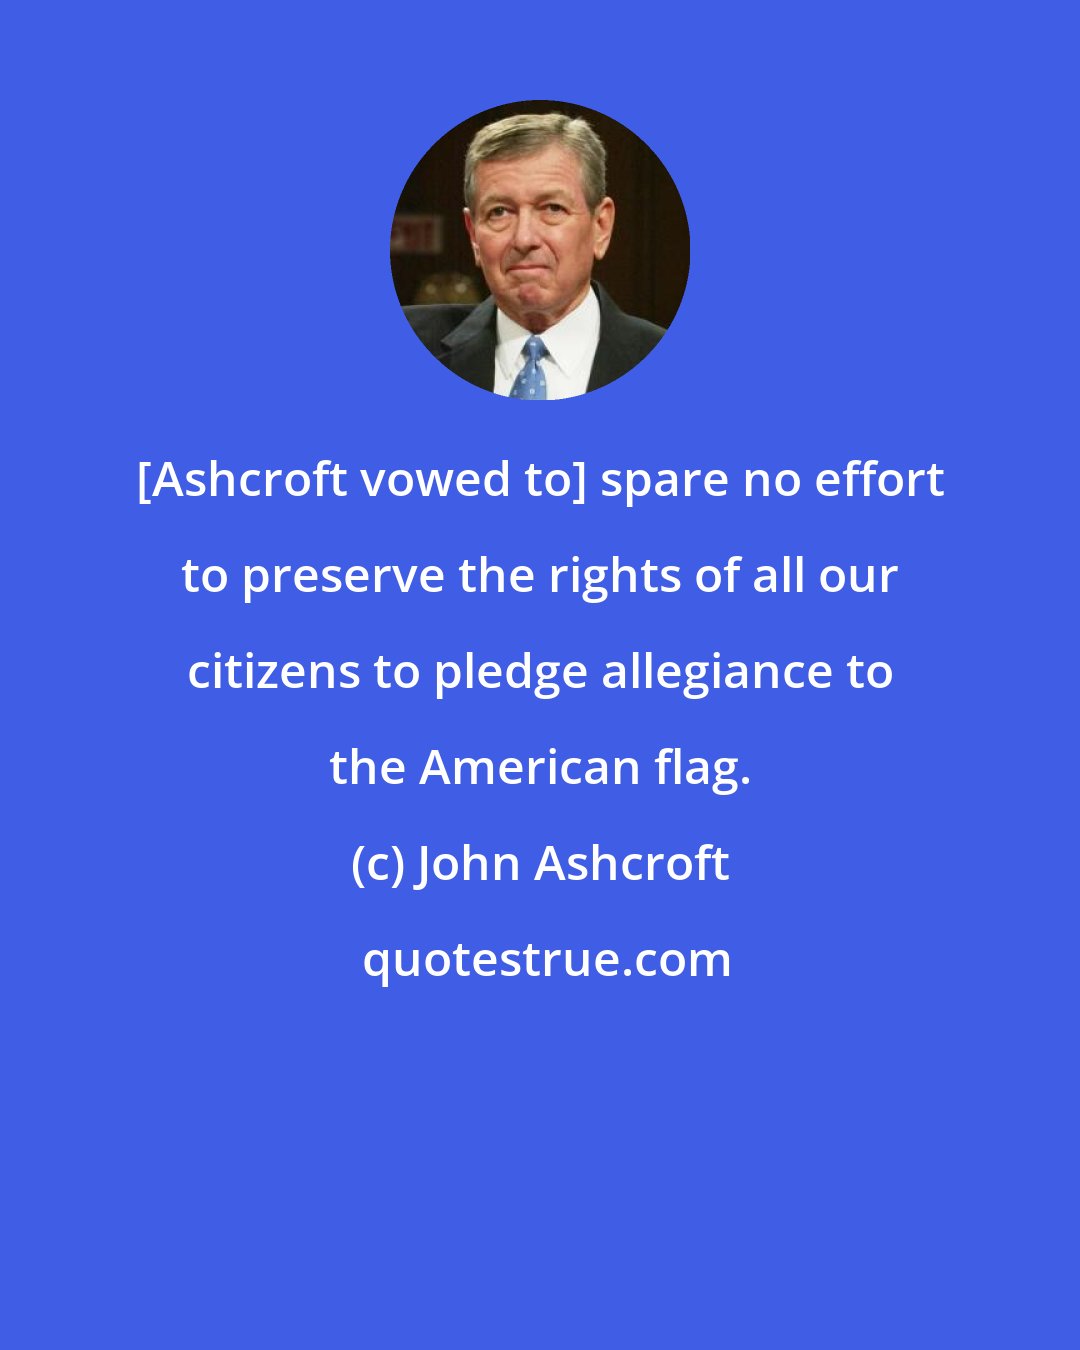 John Ashcroft: [Ashcroft vowed to] spare no effort to preserve the rights of all our citizens to pledge allegiance to the American flag.